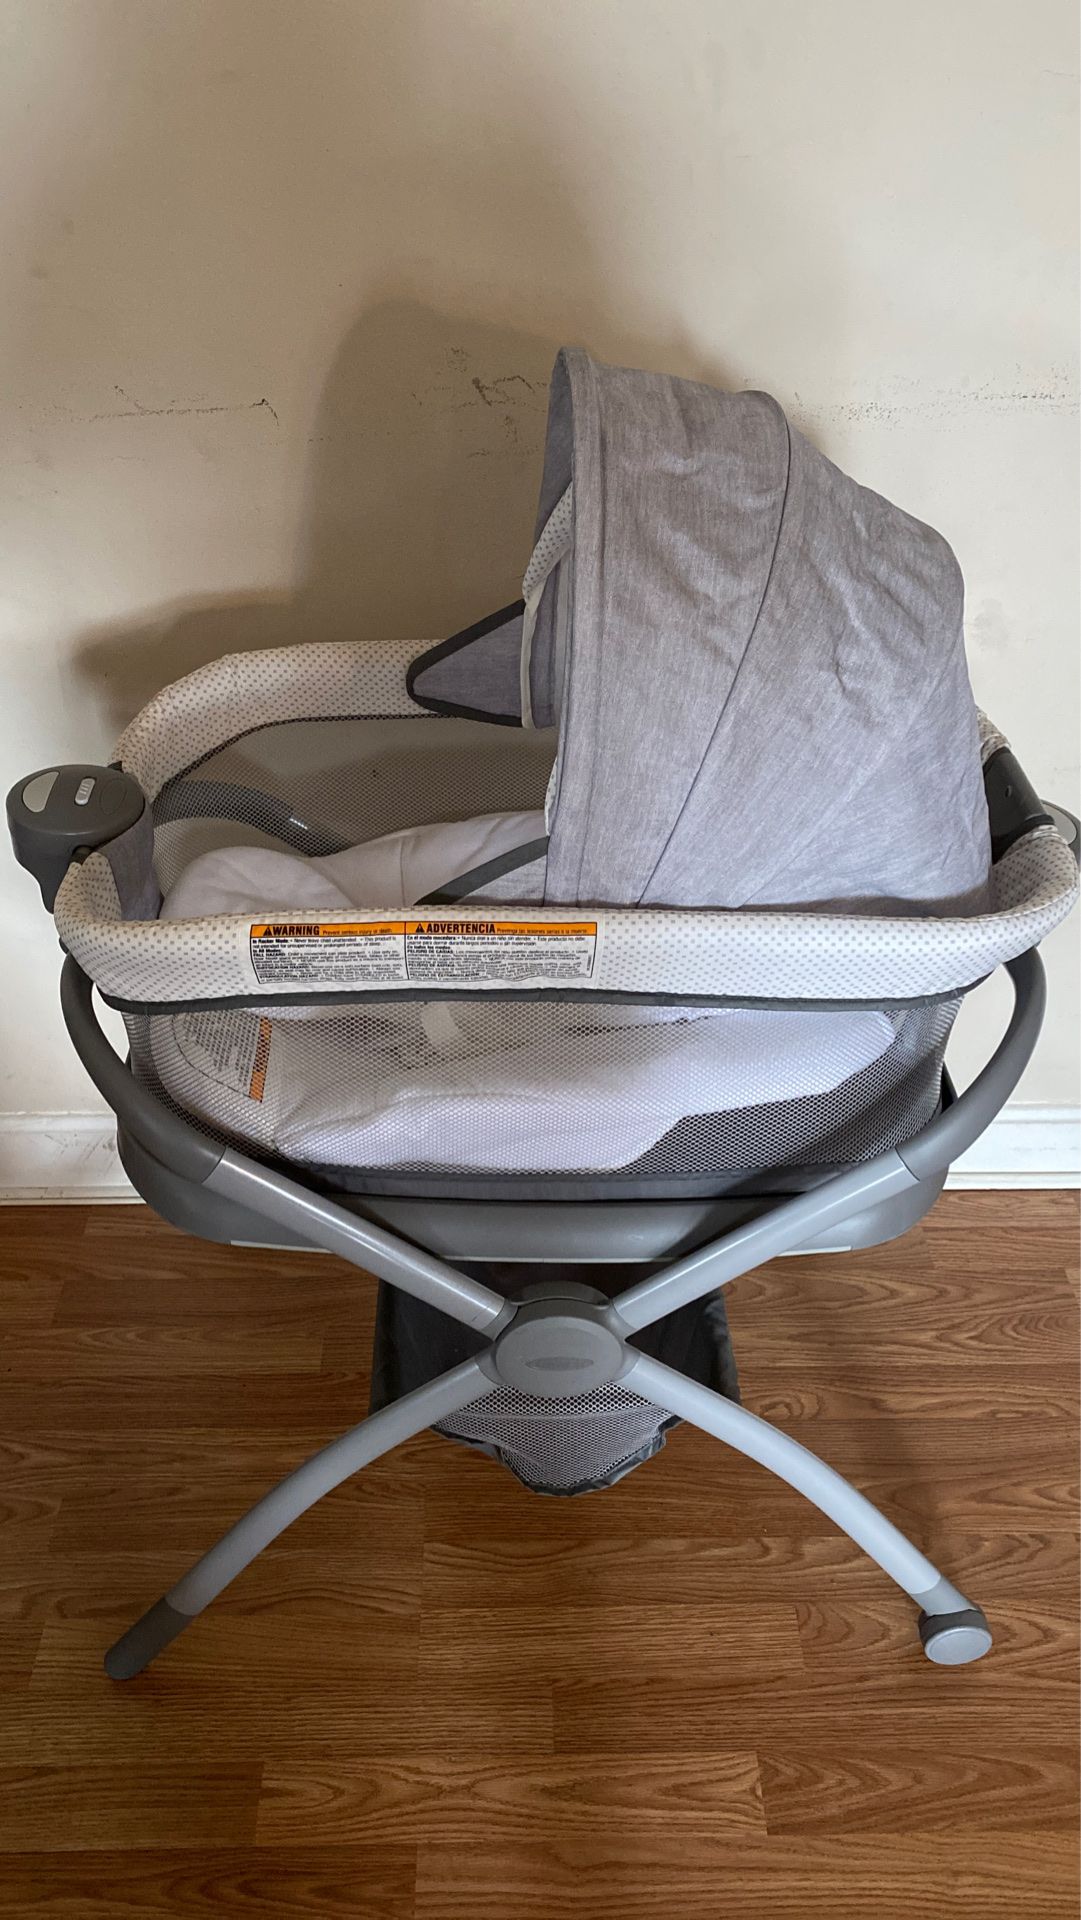 Graco bassinet gently used